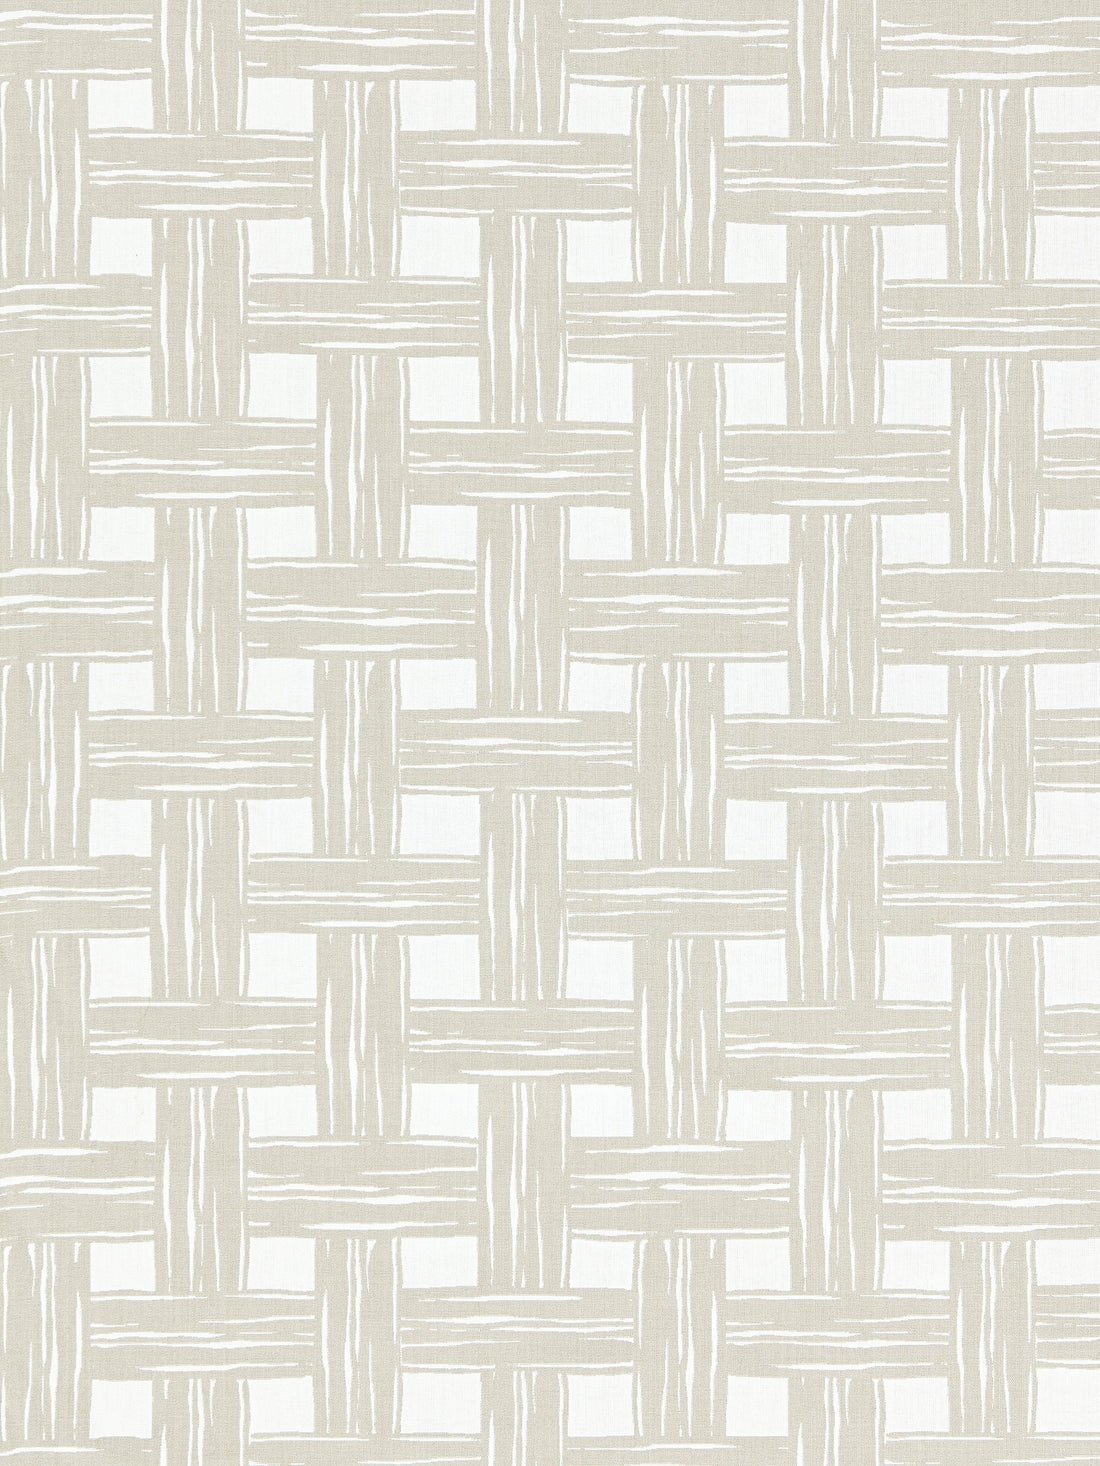 Bamboo Lattice fabric in sand color - pattern number SC 000127059 - by Scalamandre in the Scalamandre Fabrics Book 1 collection